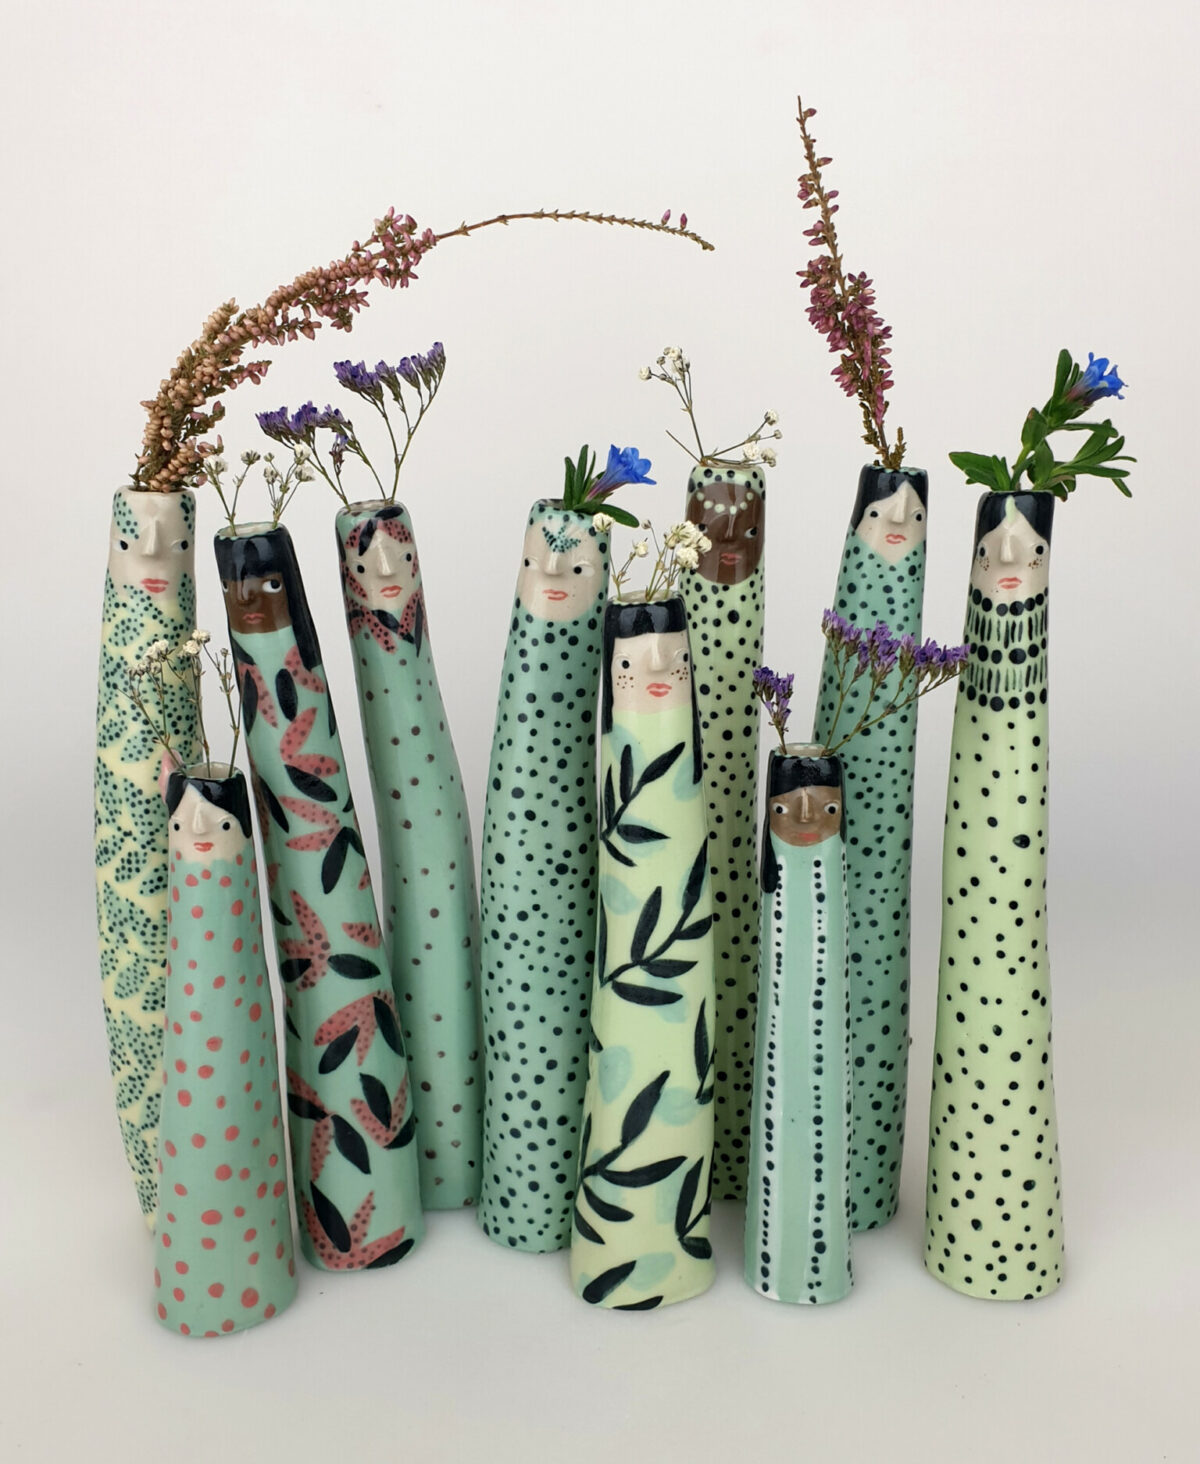 Lovely Porcelain Pieces Patterned With Quirky Cartoon Like Figures By Sandra Apperloo 4